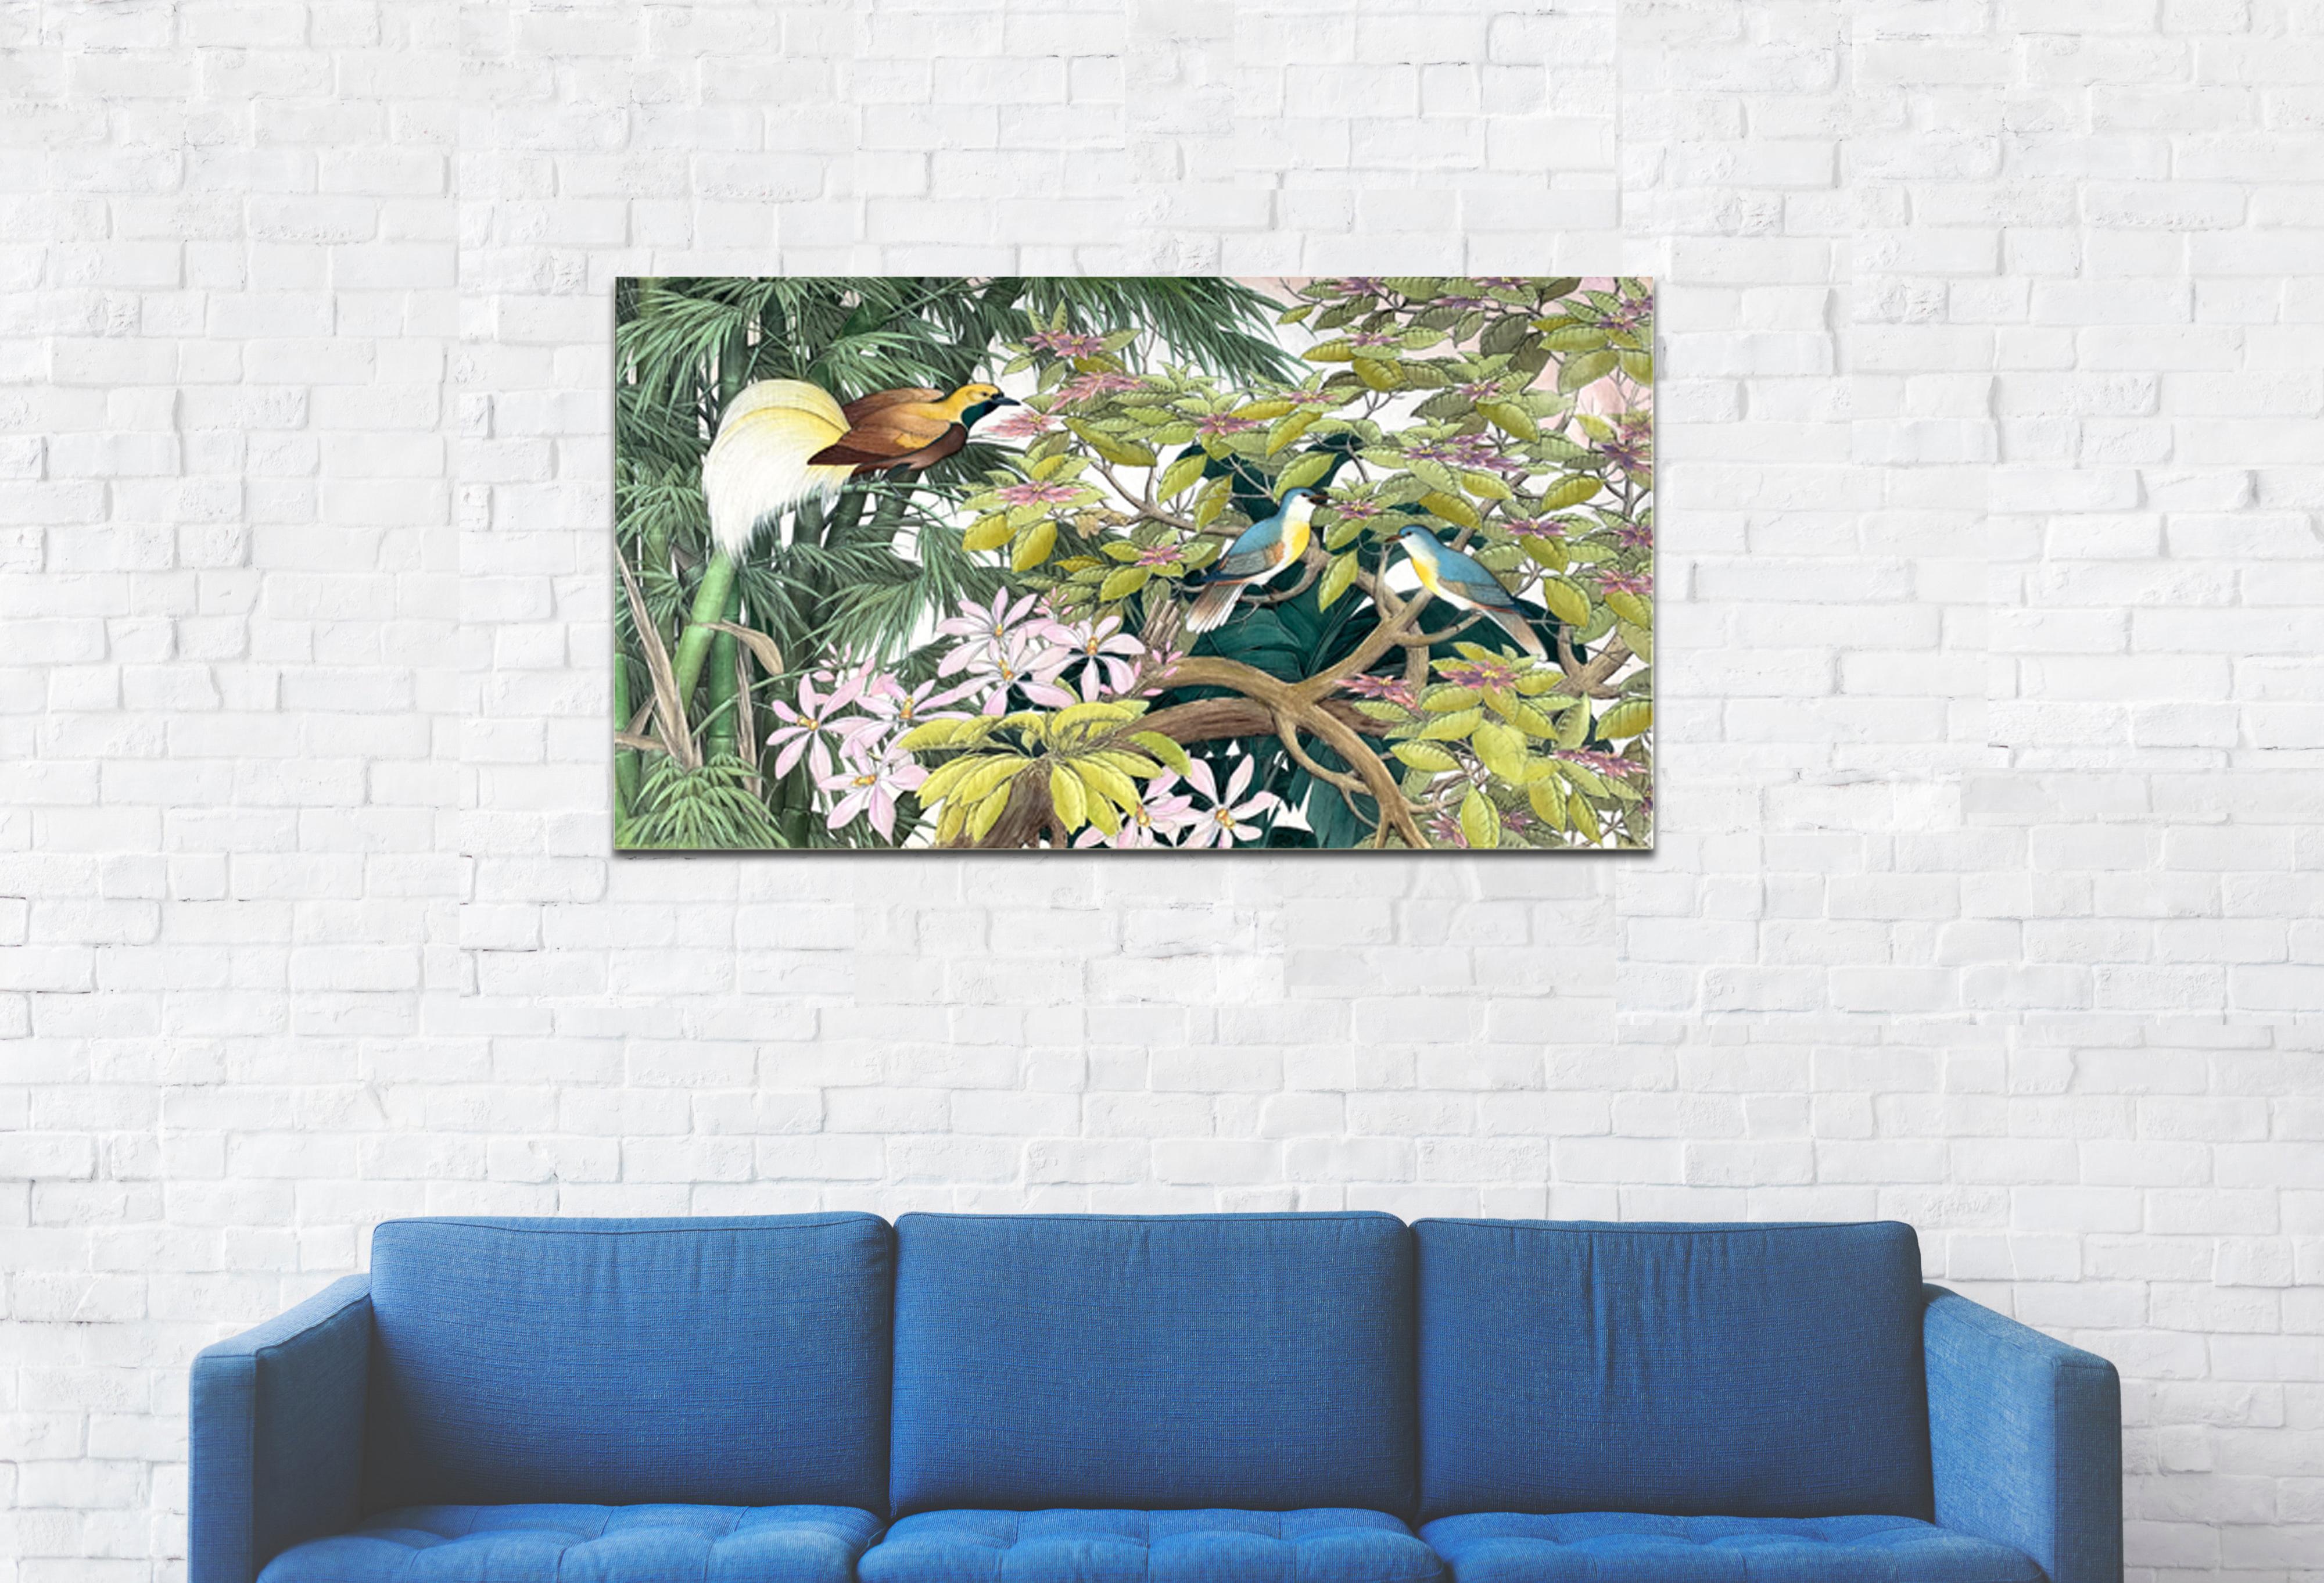 The Whispering Rainforest by Katharina Husslein colorful contemporary landscape 5